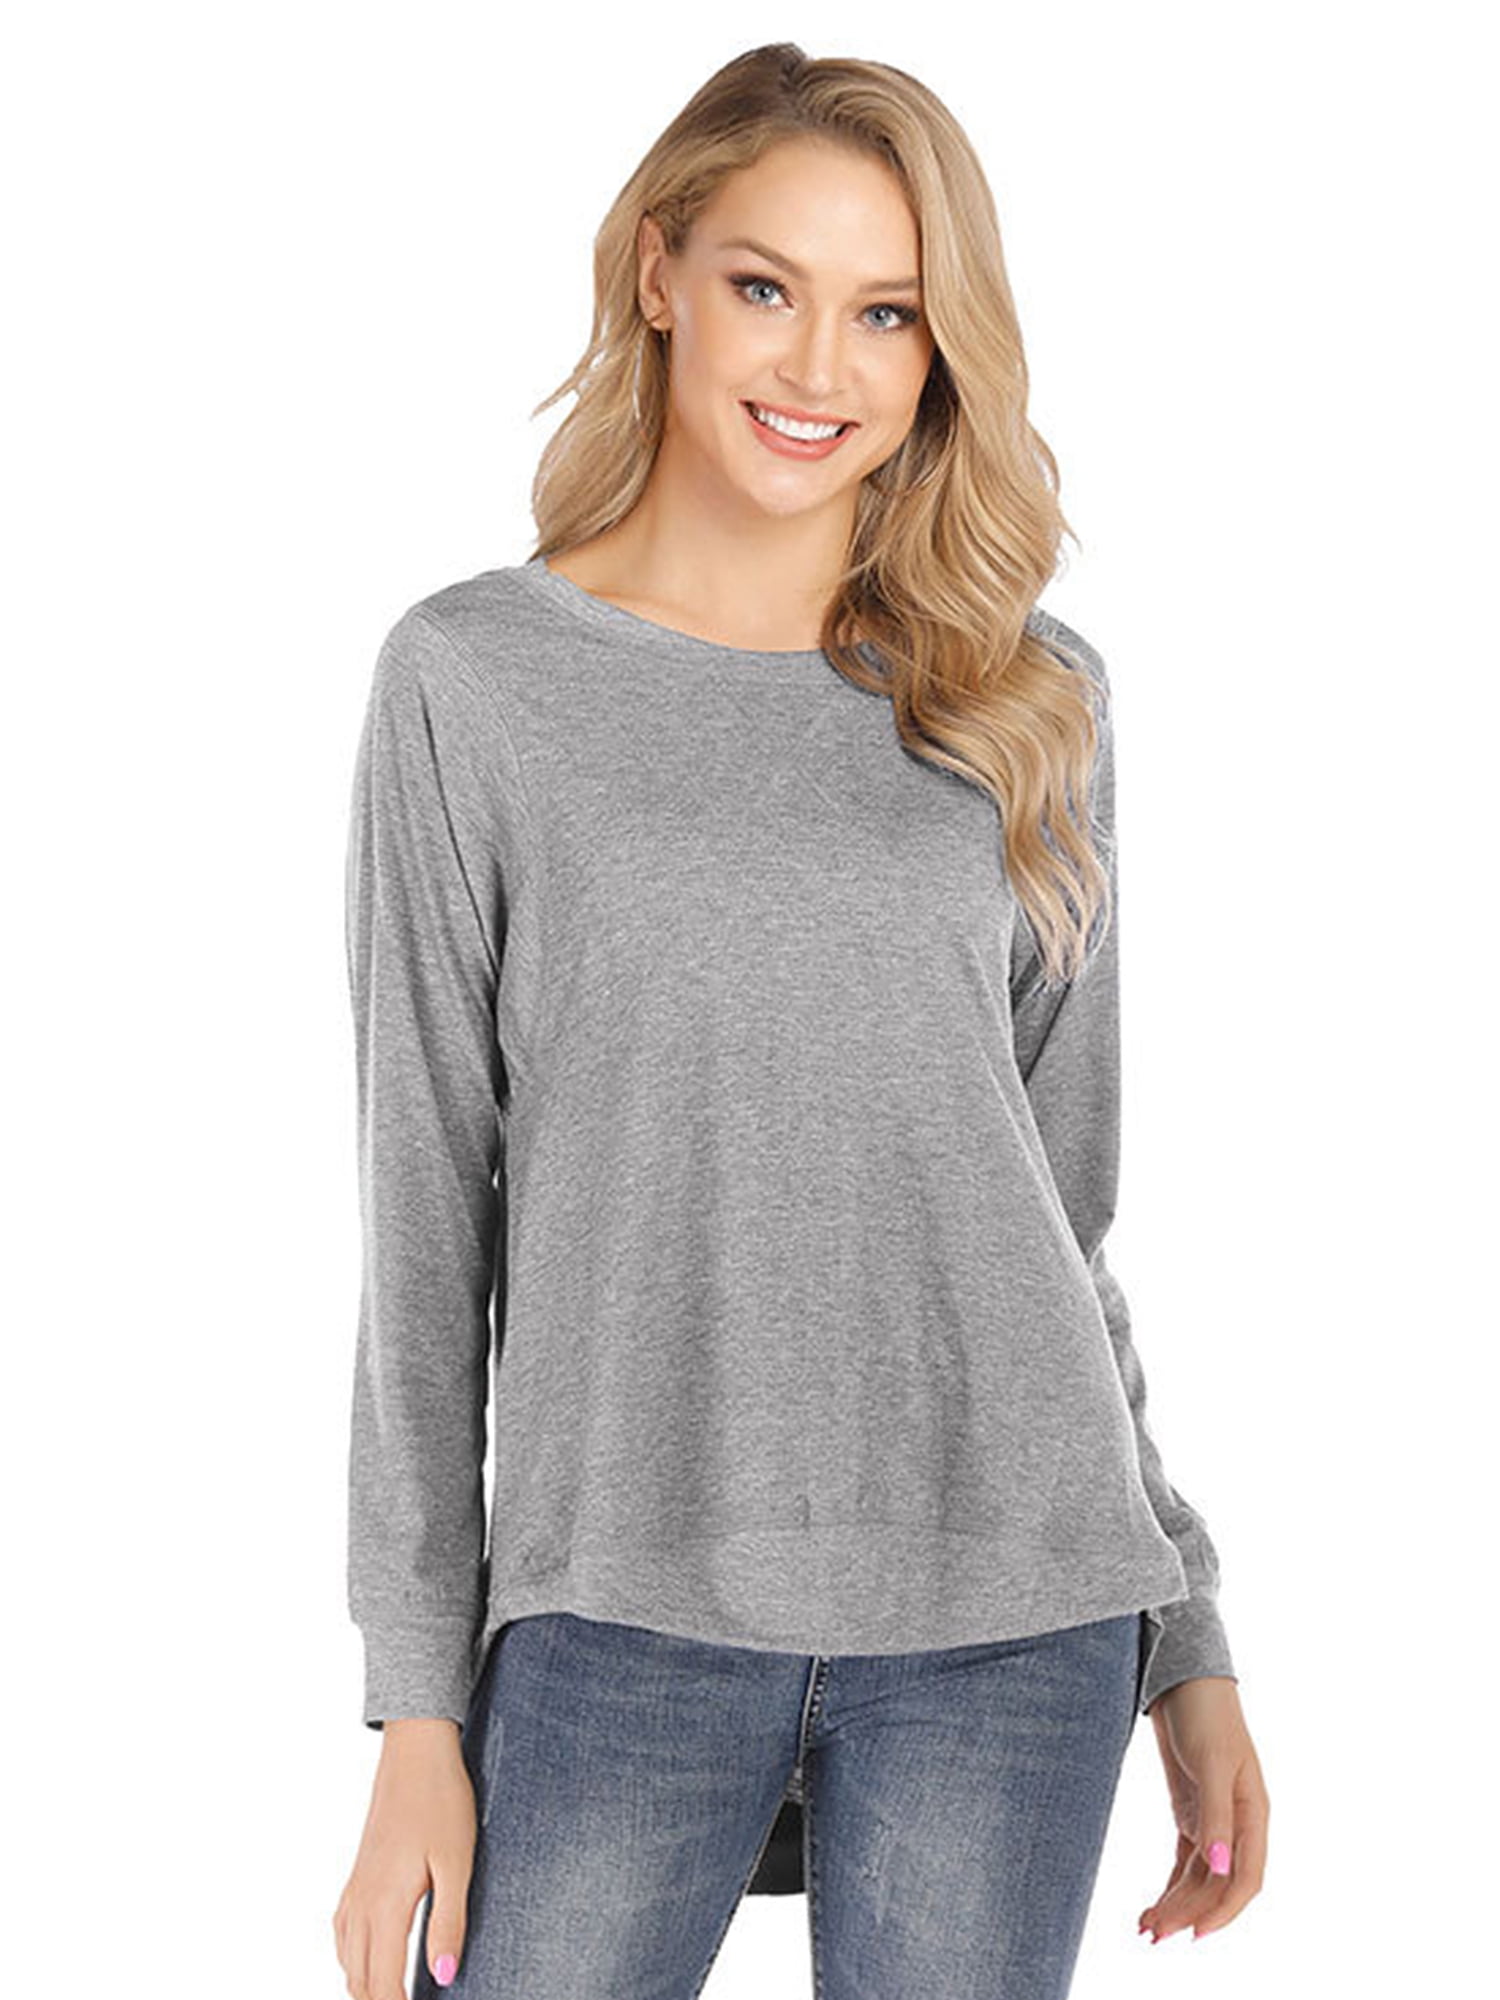 NEWTECHNOLOGYY - Women Solid Color Long Sleeve Casual T-Shirts Ladies ...